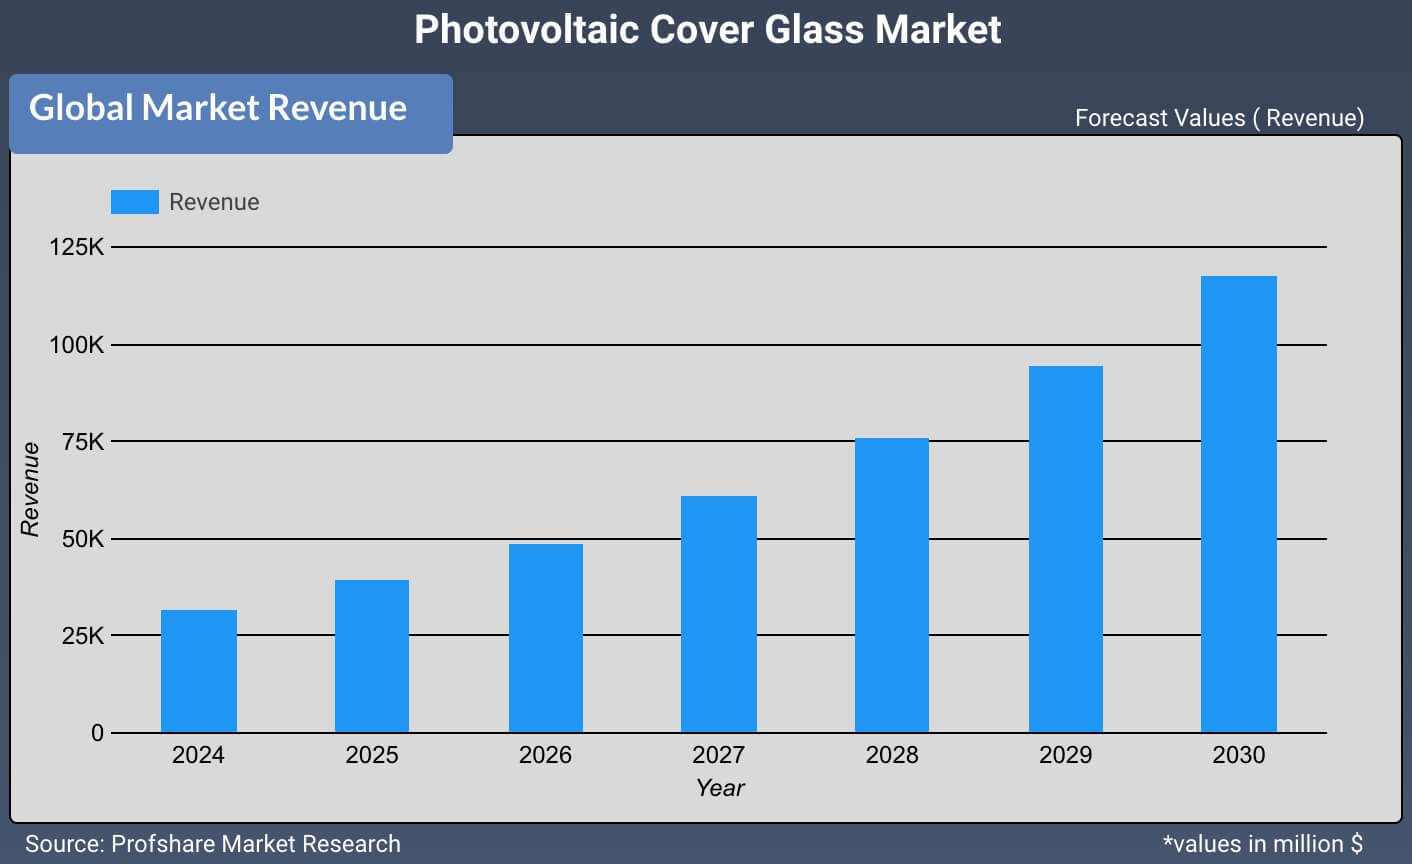 Photovoltaic Cover Glass Market